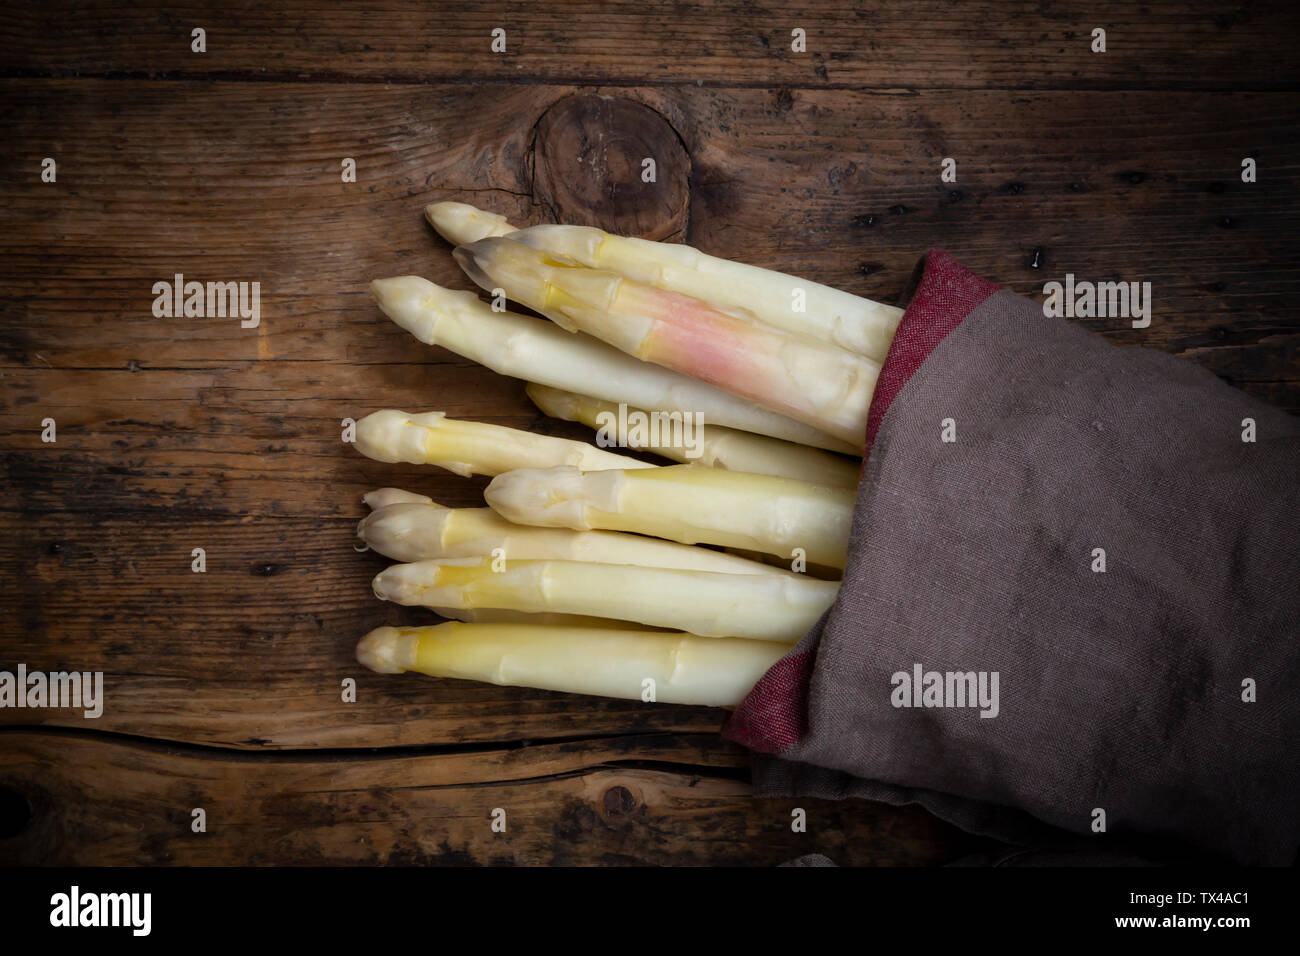 Bunch of white asparagus, kitchen towel, from above Stock Photo